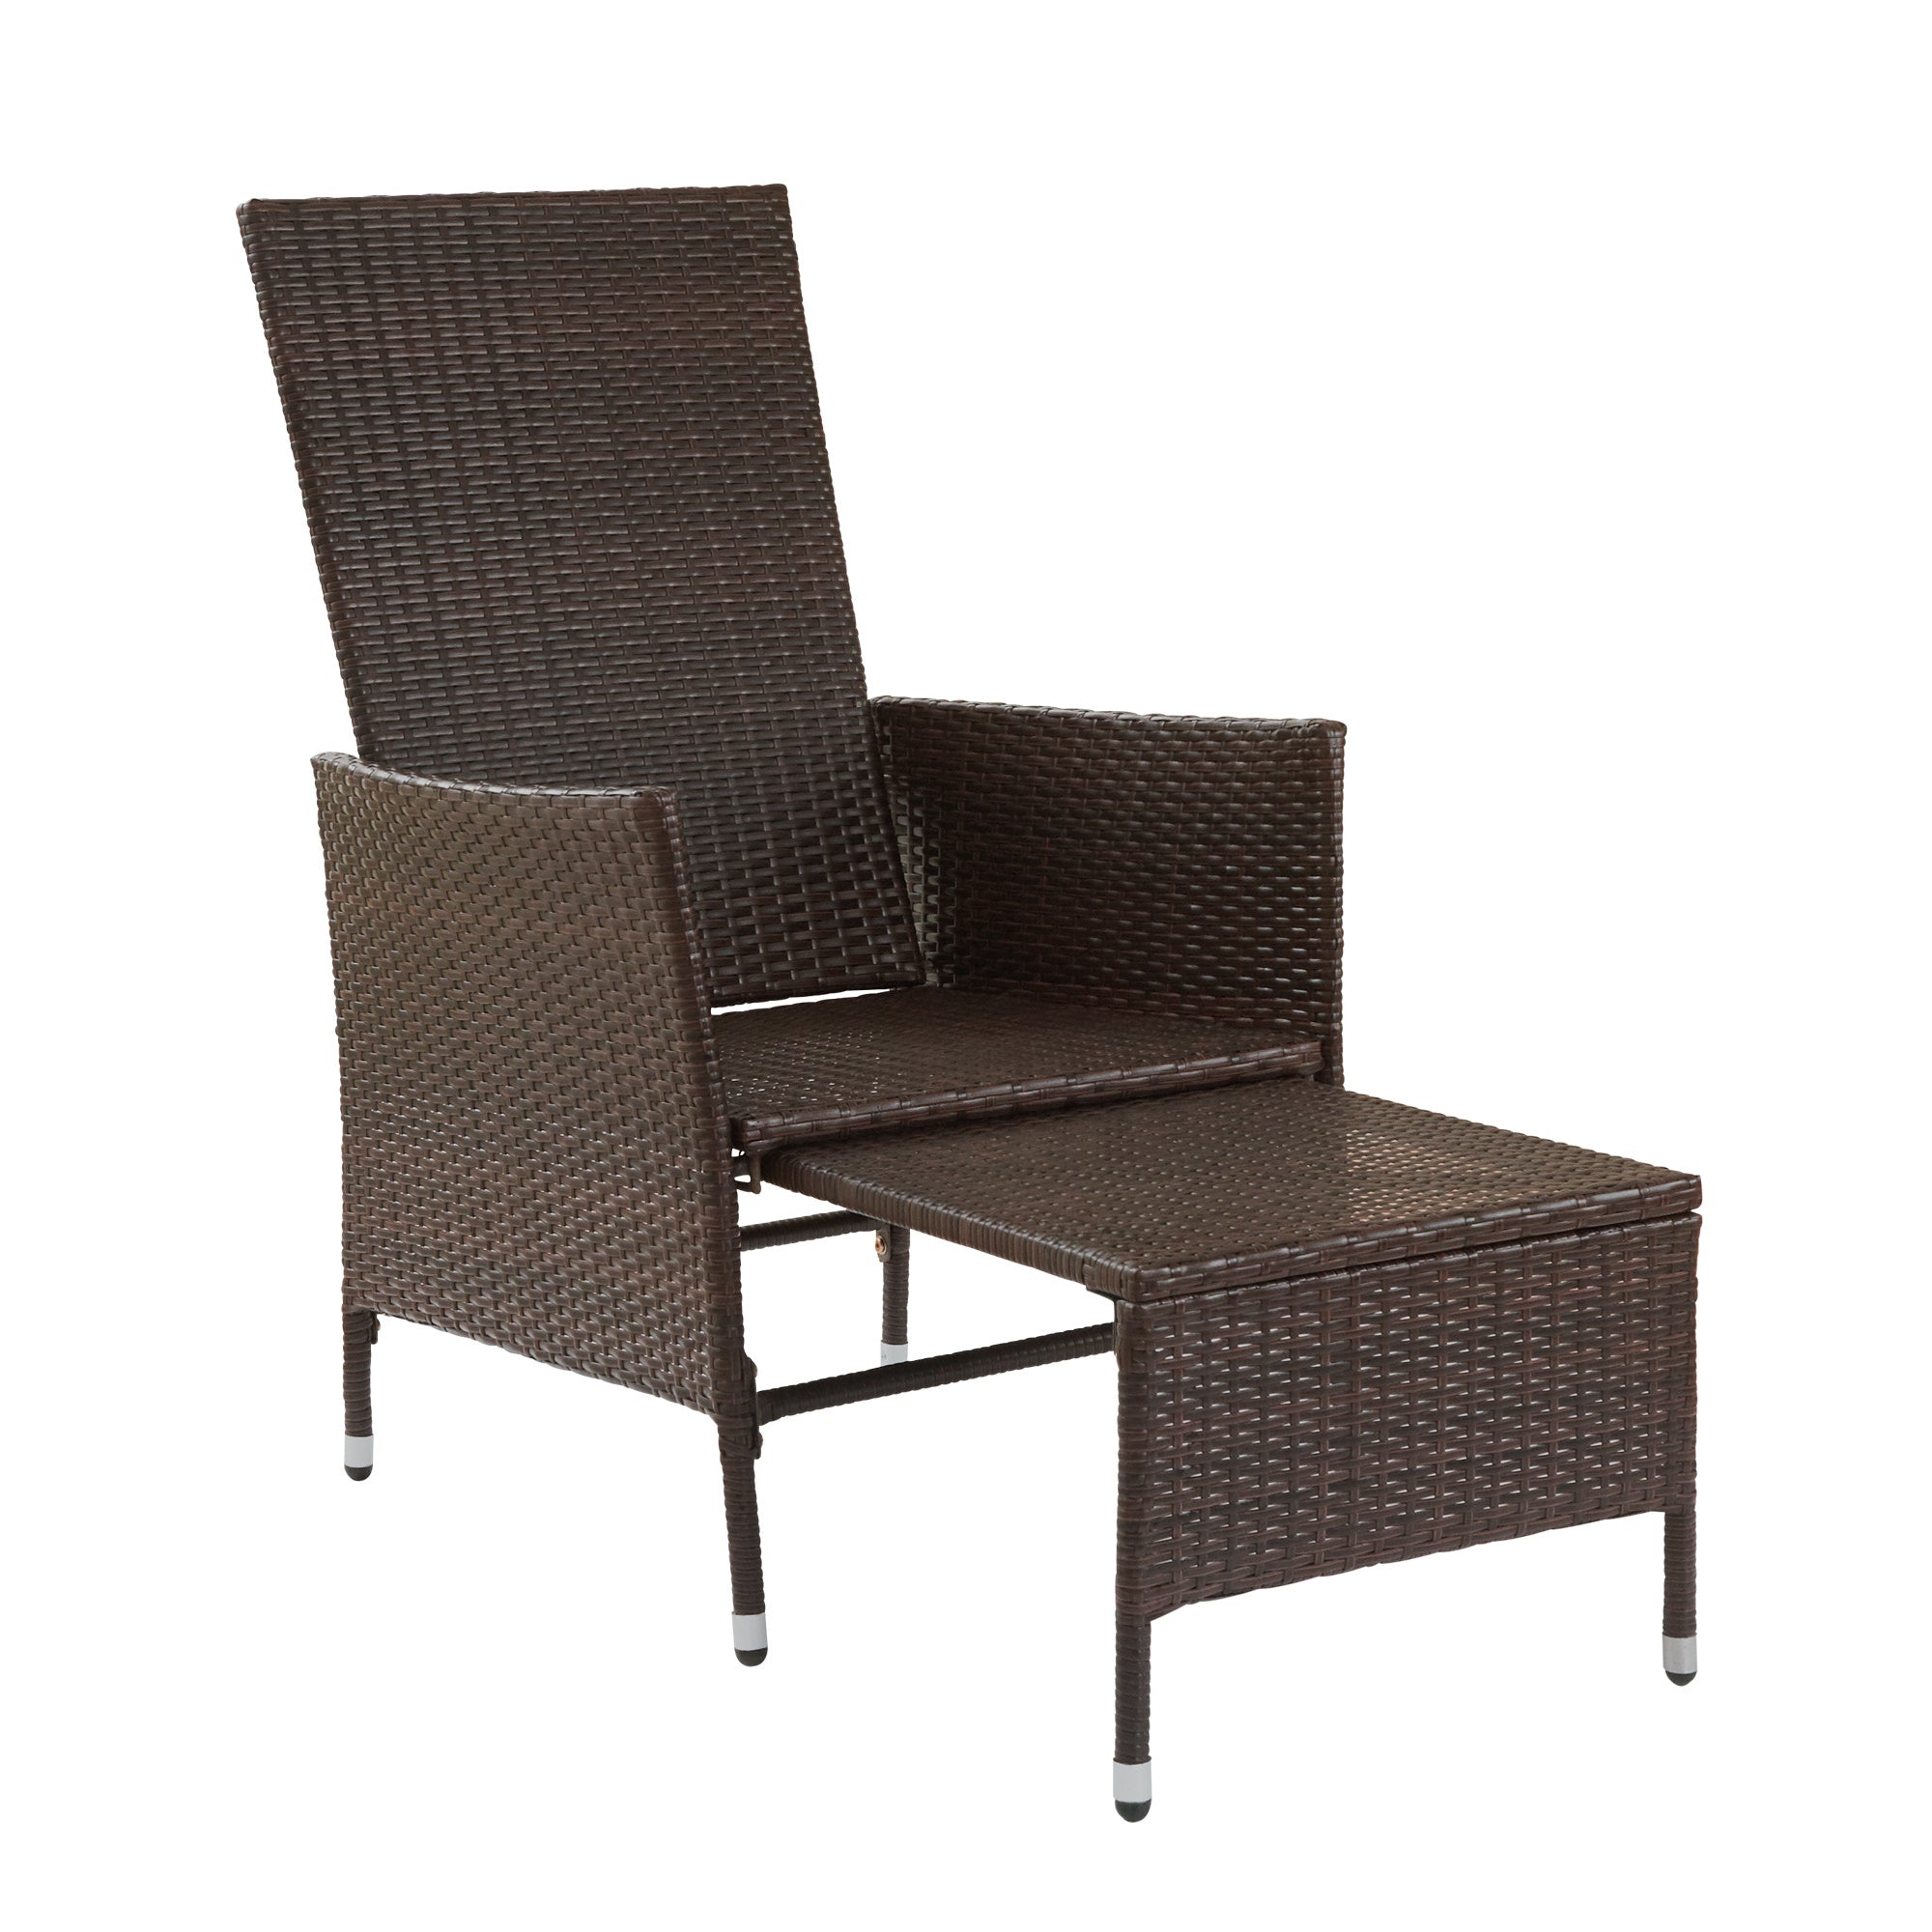 Teamson Home Outdoor PE Rattan & Wicker Patio Lounge Chair with Pull-Out Ottoman and Cushions, Brown/White